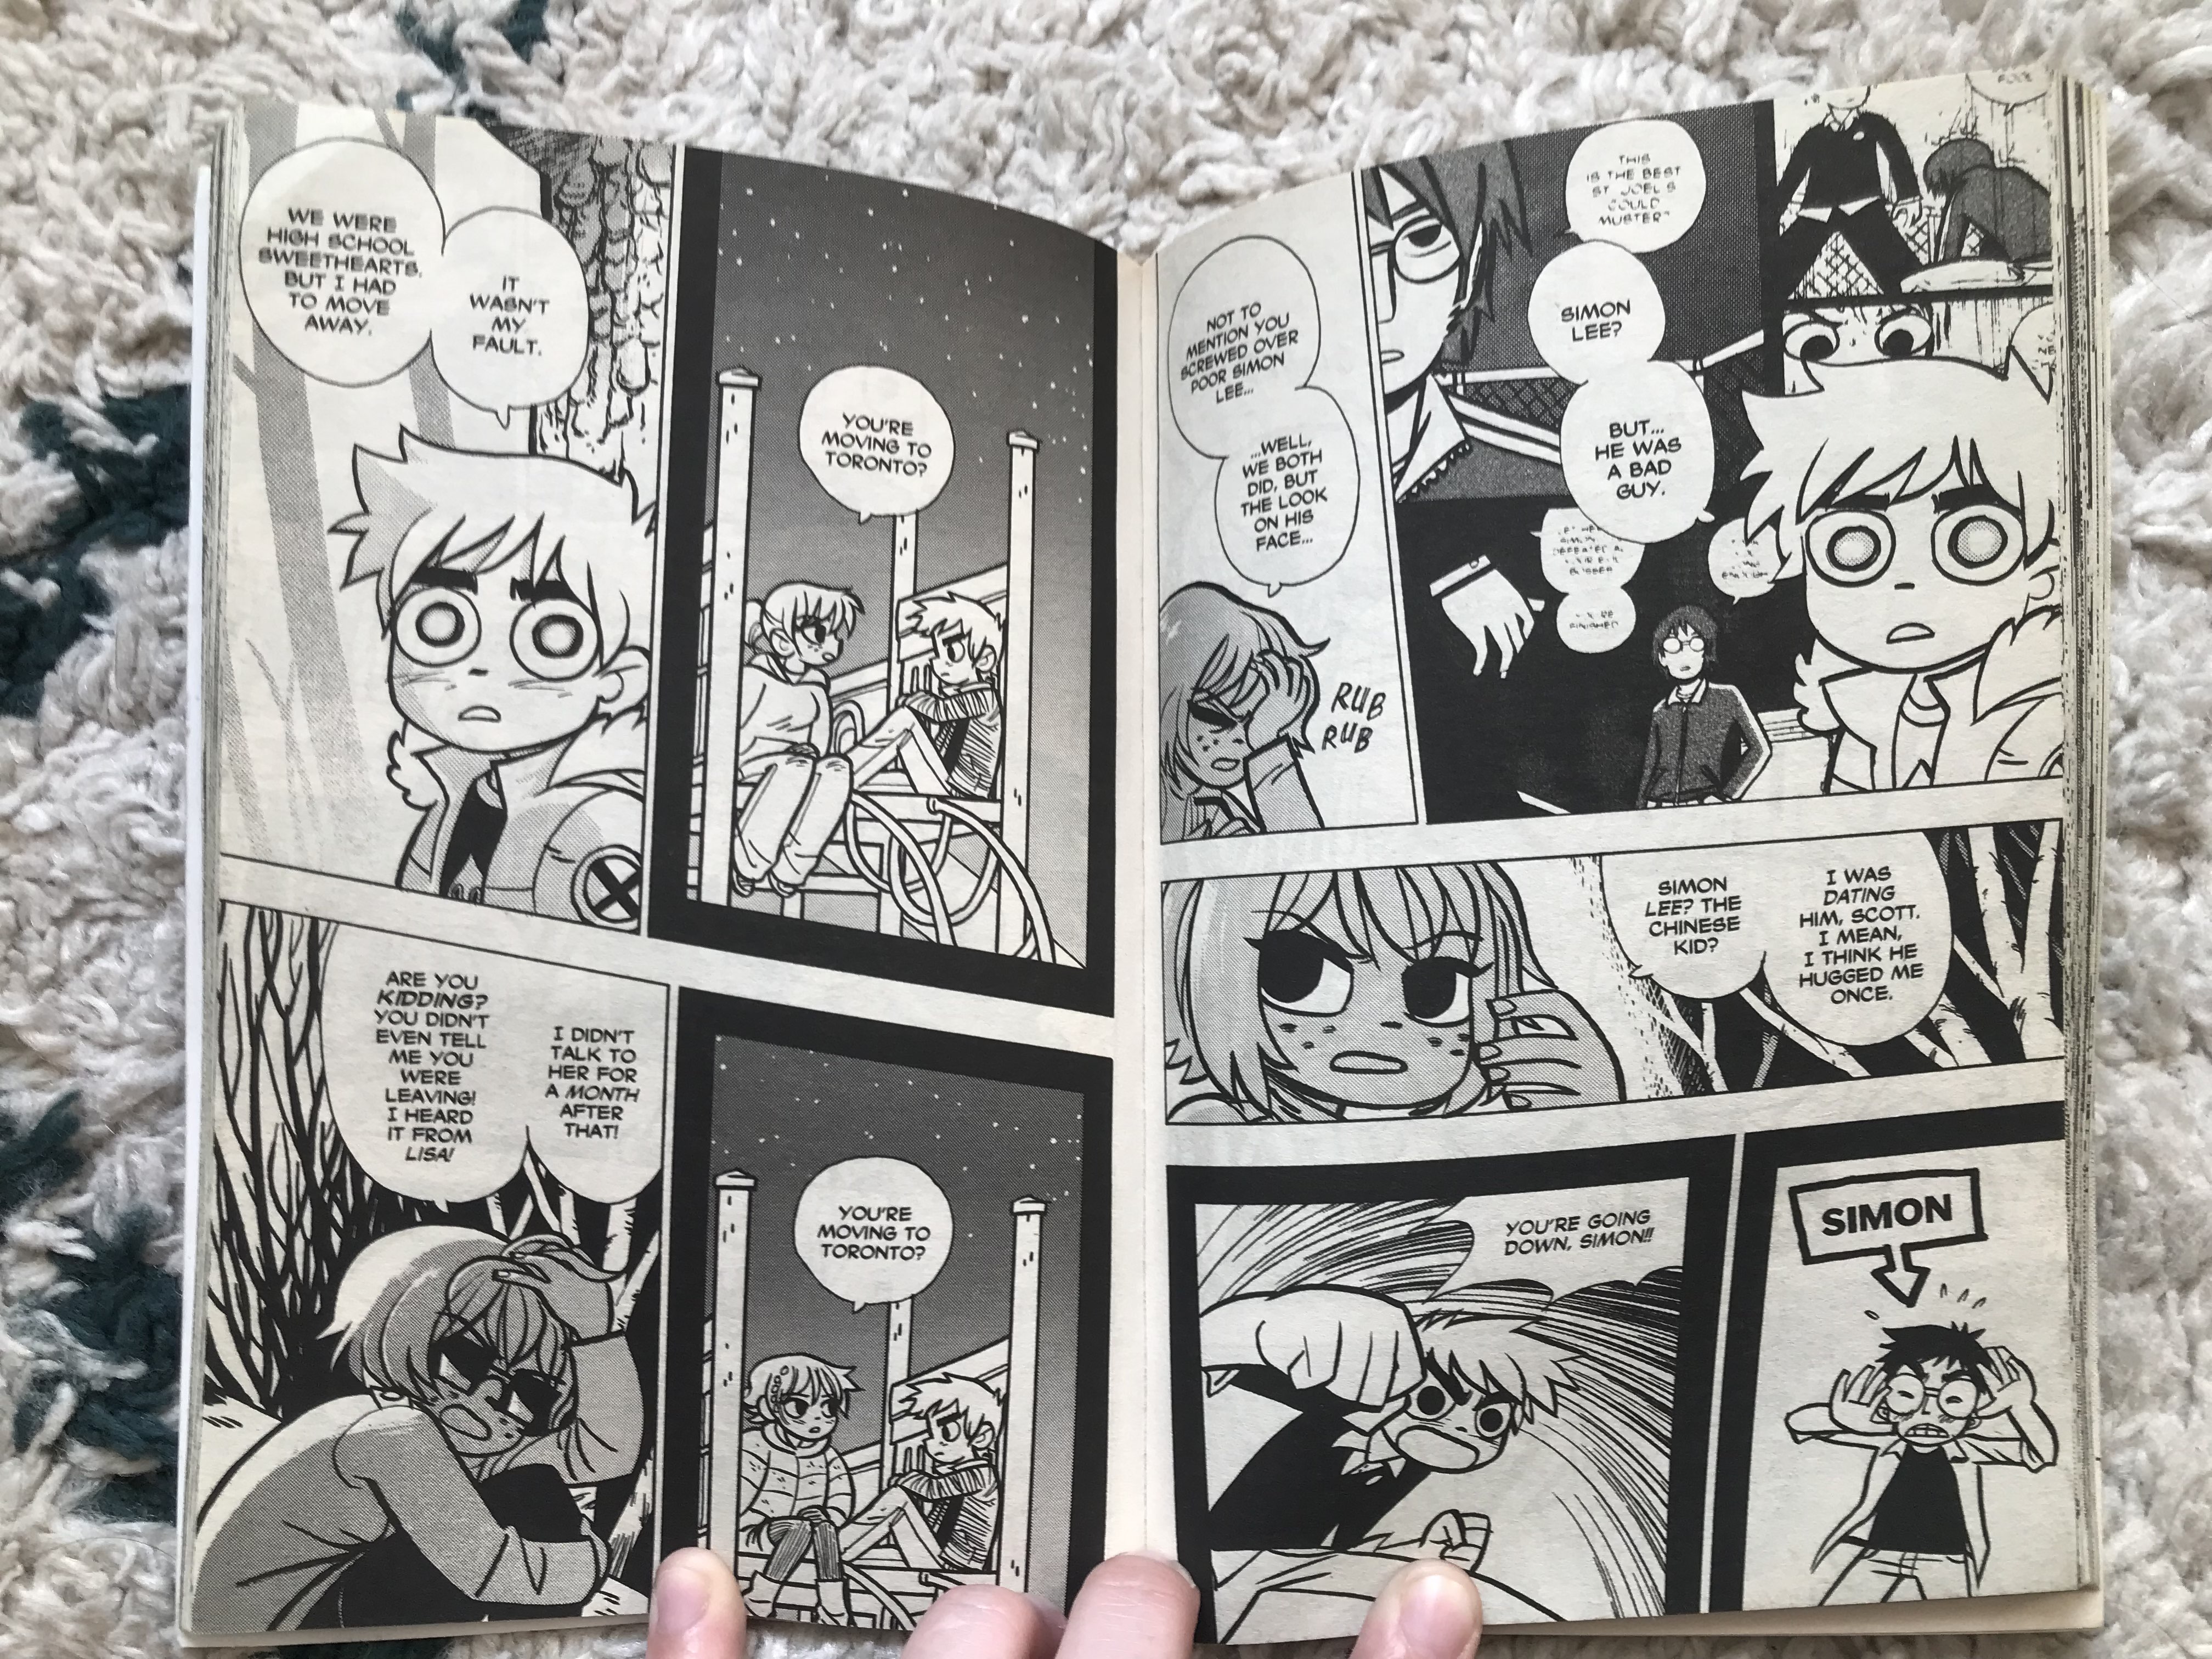 A photo of two black and white pages of Scott Pilgrim, showing Kim explaining to Scott how Scott hurt more in their previous relationship than he remembers, and how Scott imagined himself in a cool boss battle for Kim's affection when he actually beat up a classmate for no reason.